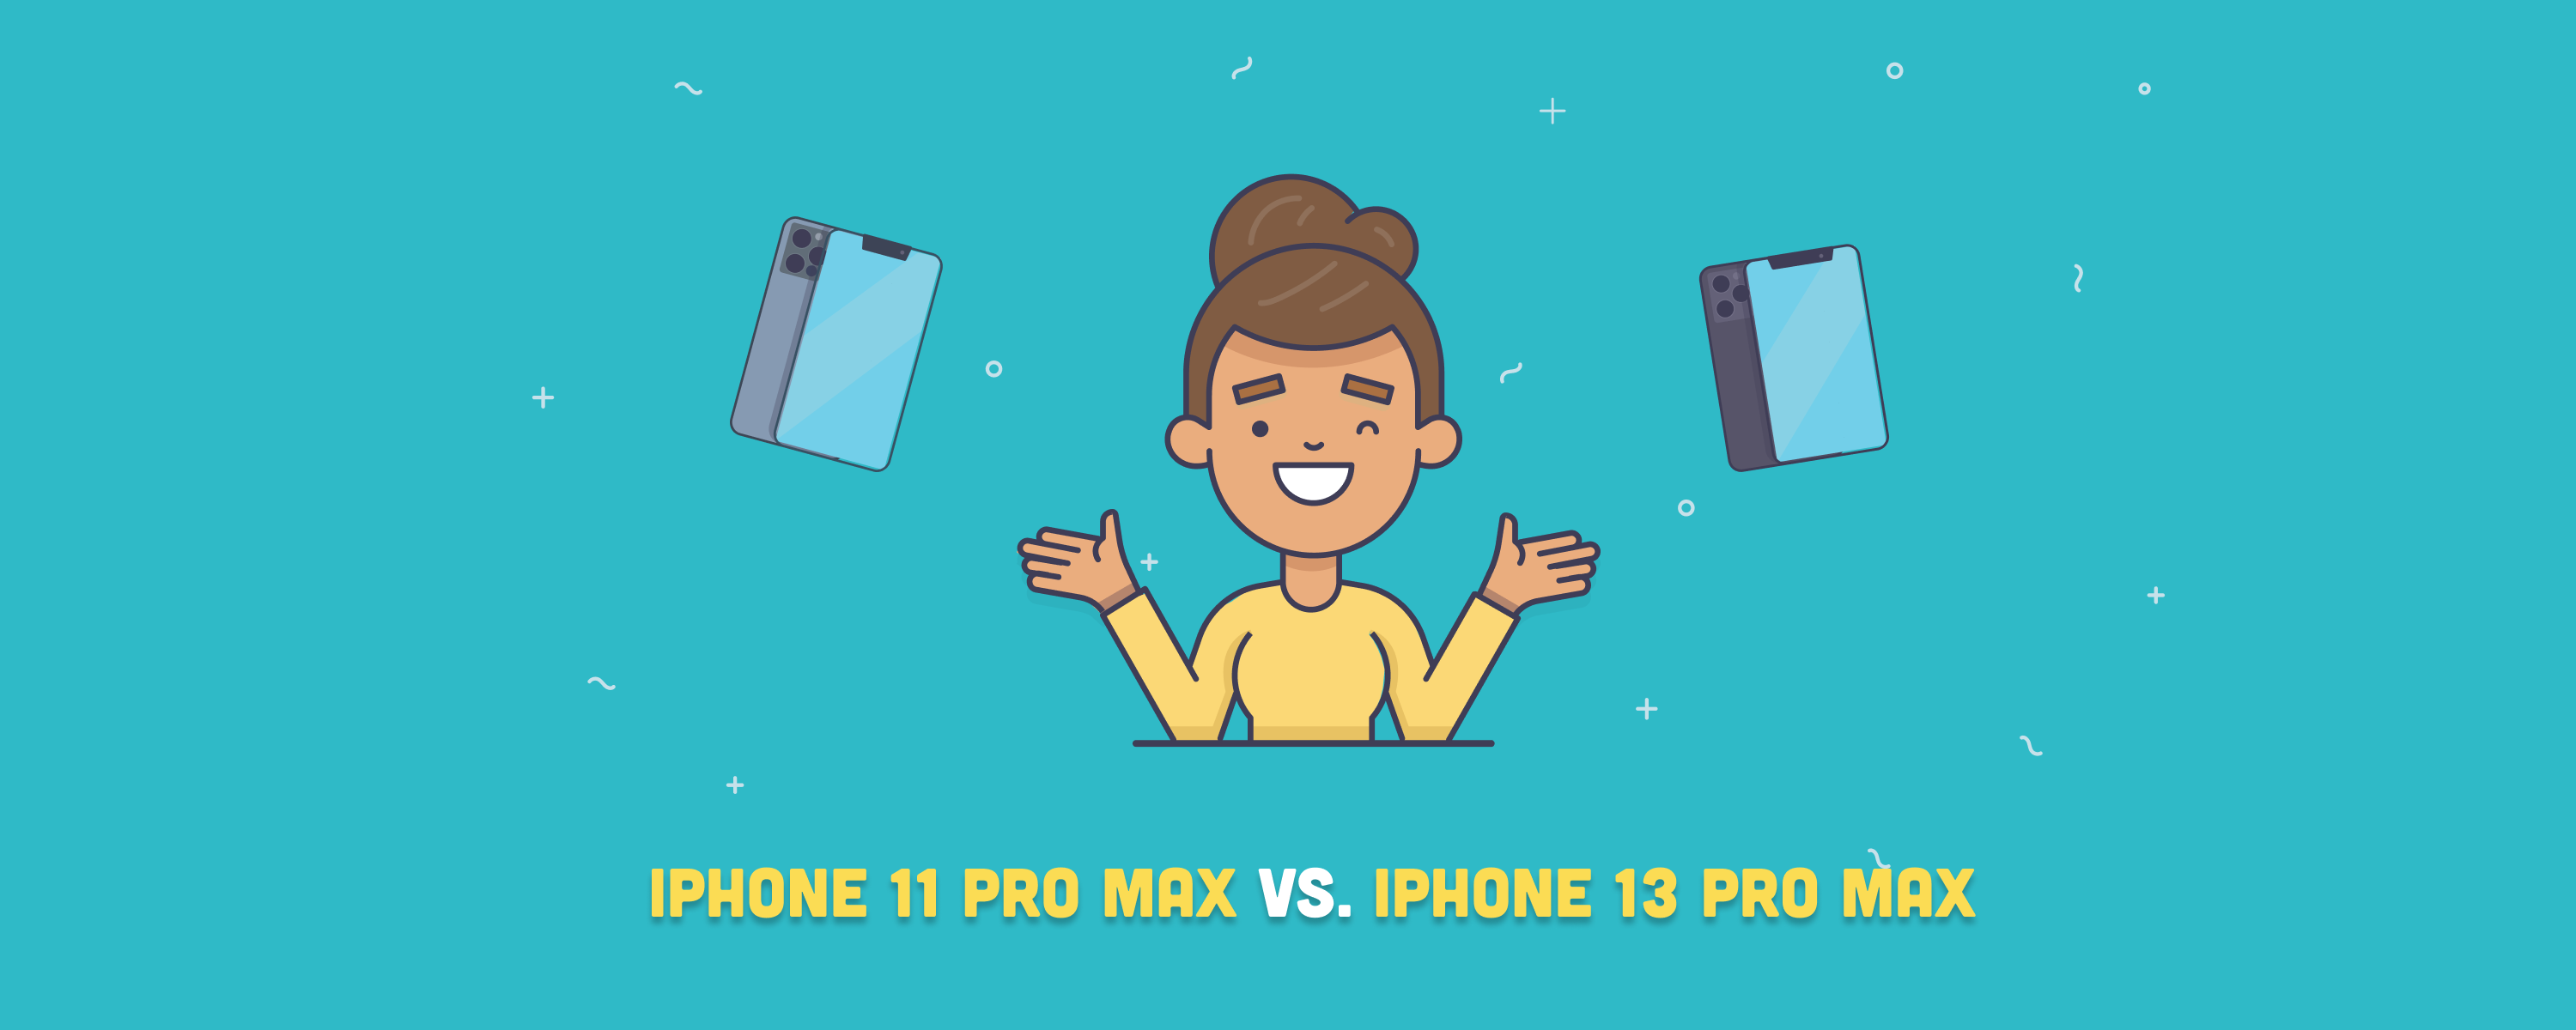 iPhone 11 Pro Max vs. iPhone 13 Pro Max: All the Differences